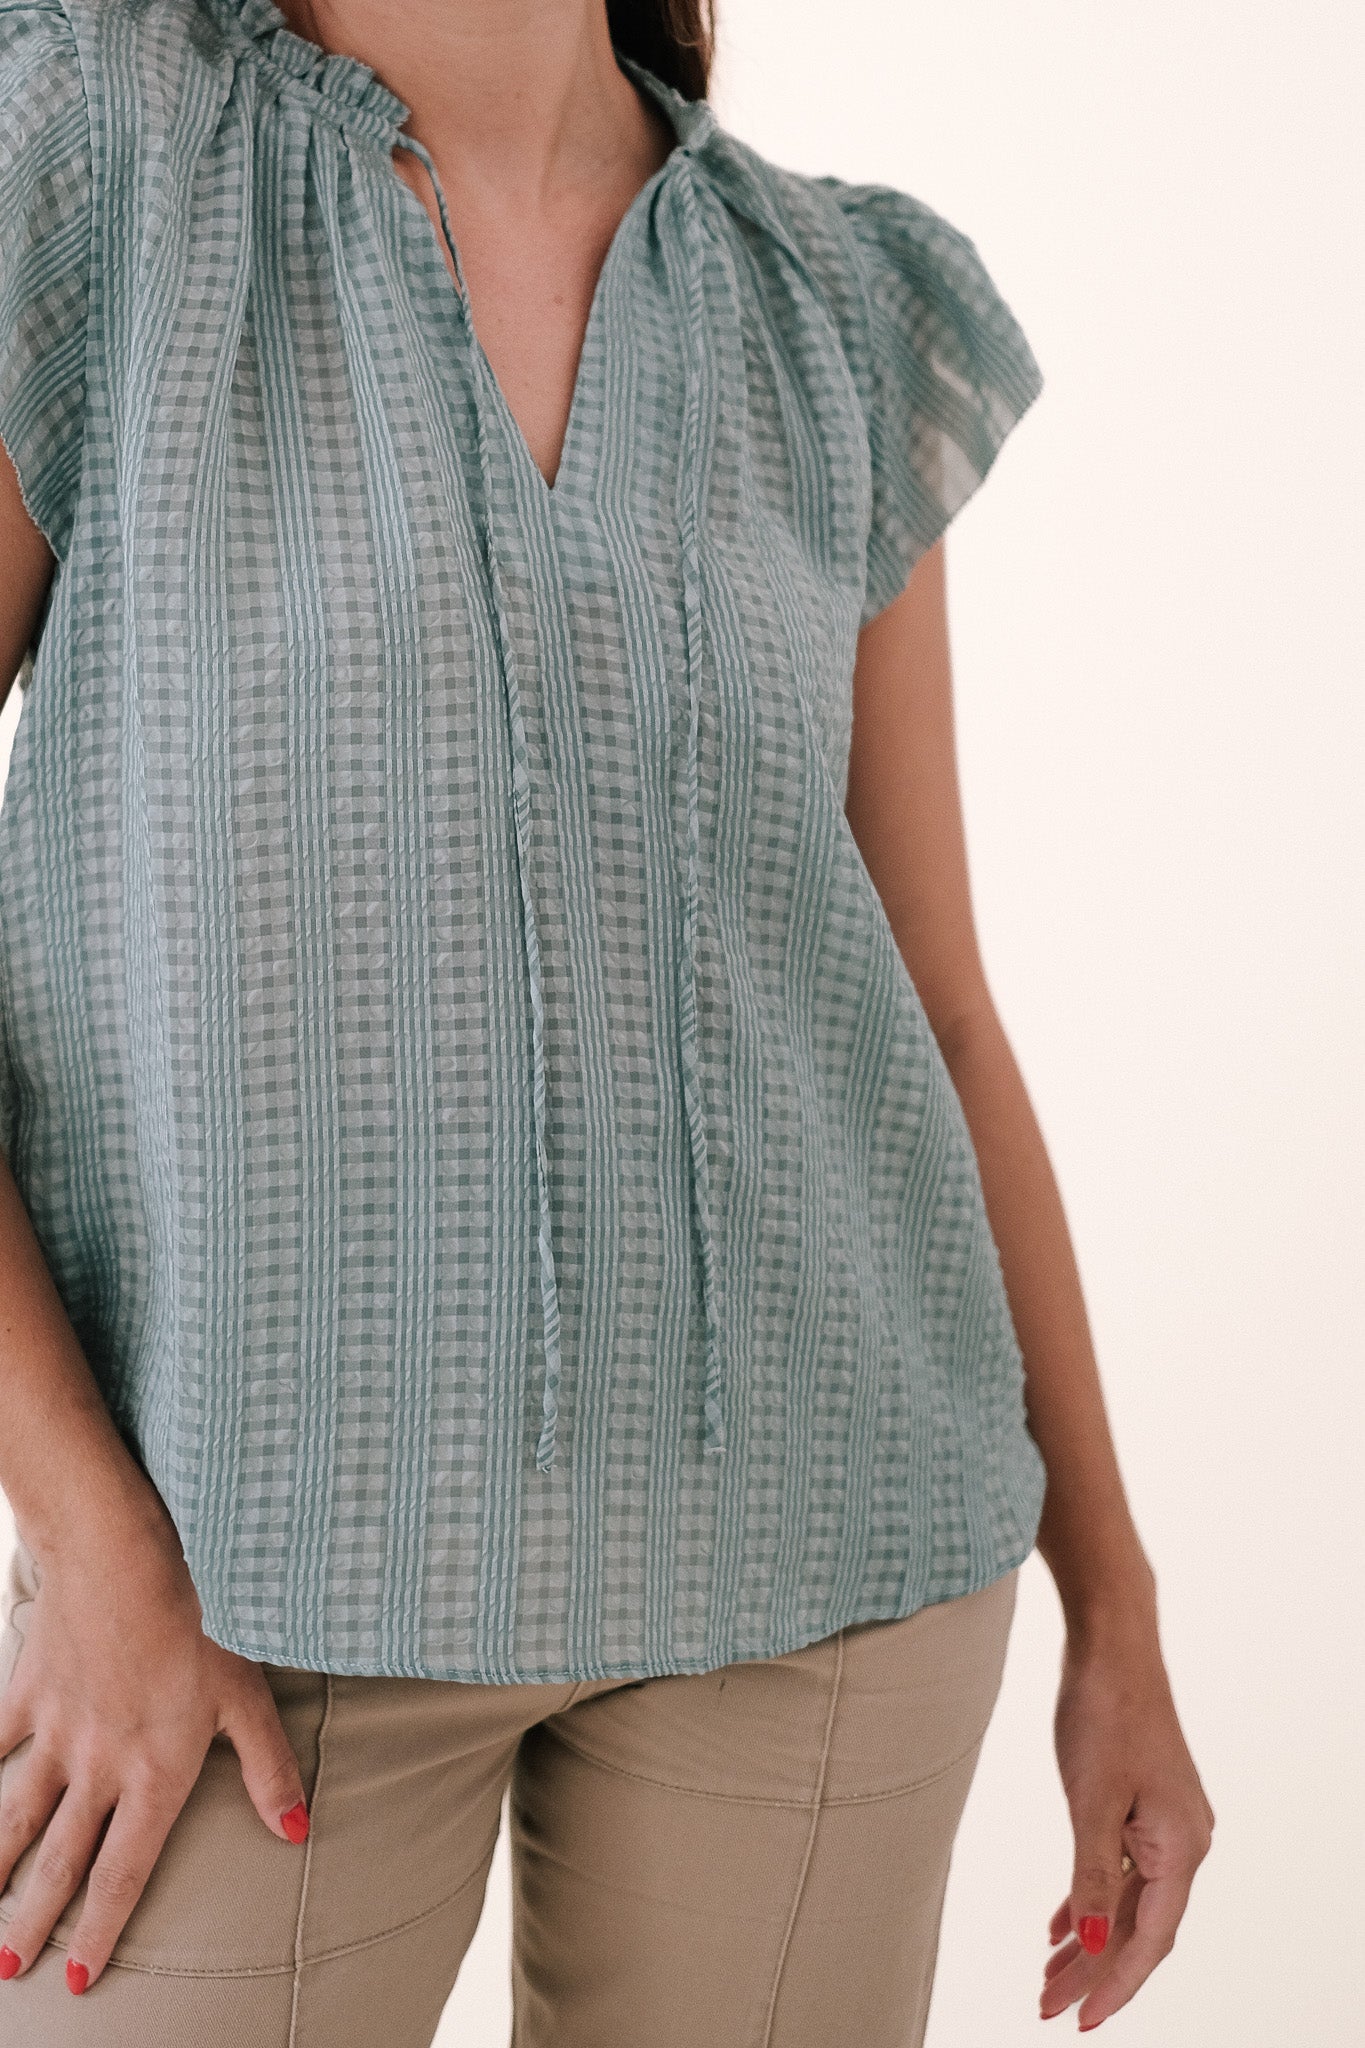 Current Air Cora Picot Flutter Sleeve Blouse (Sage)